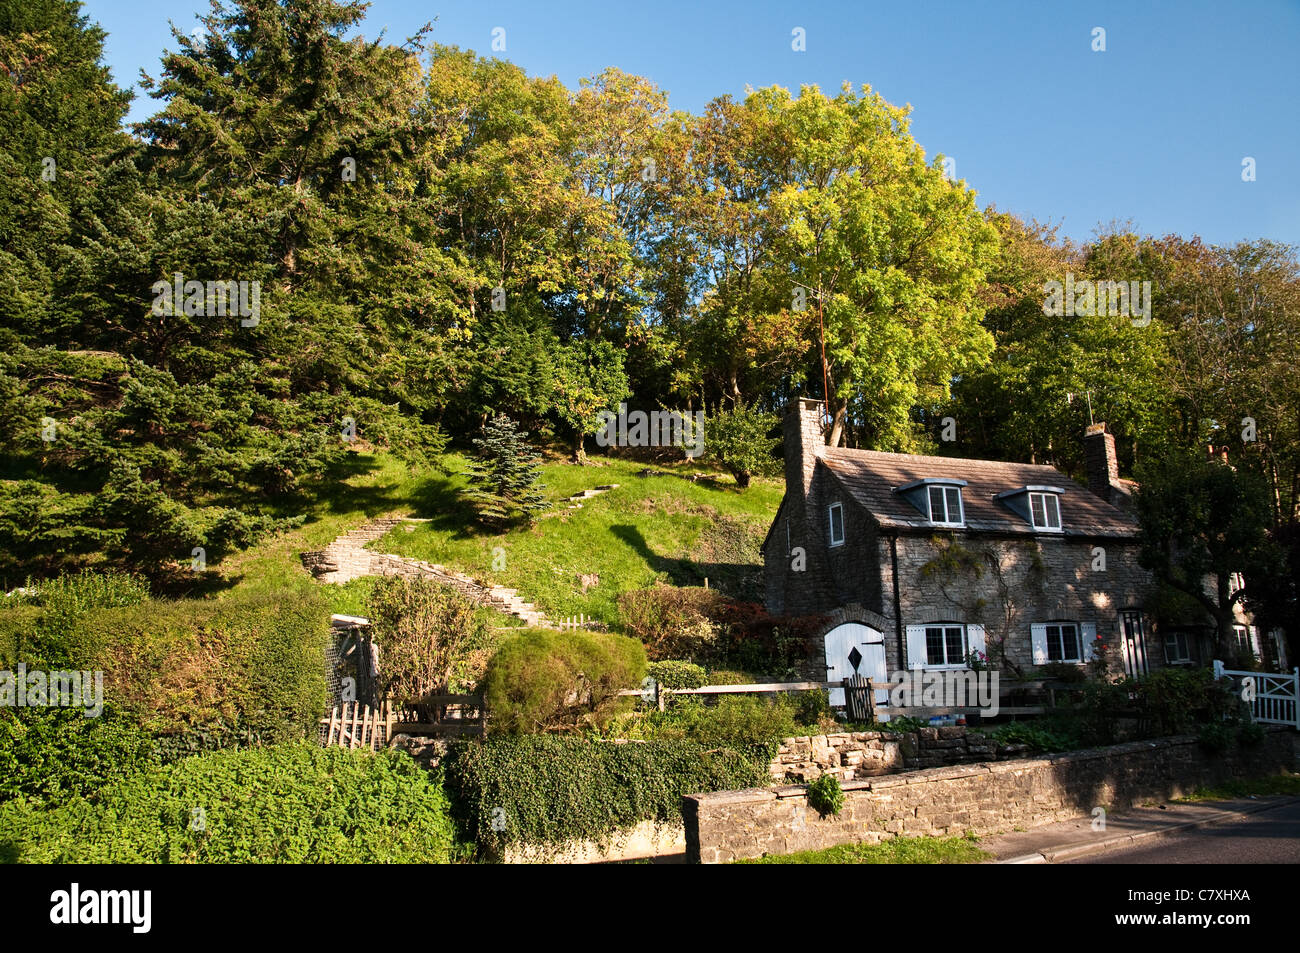 A house in the picturesque English countryside Stock Photo